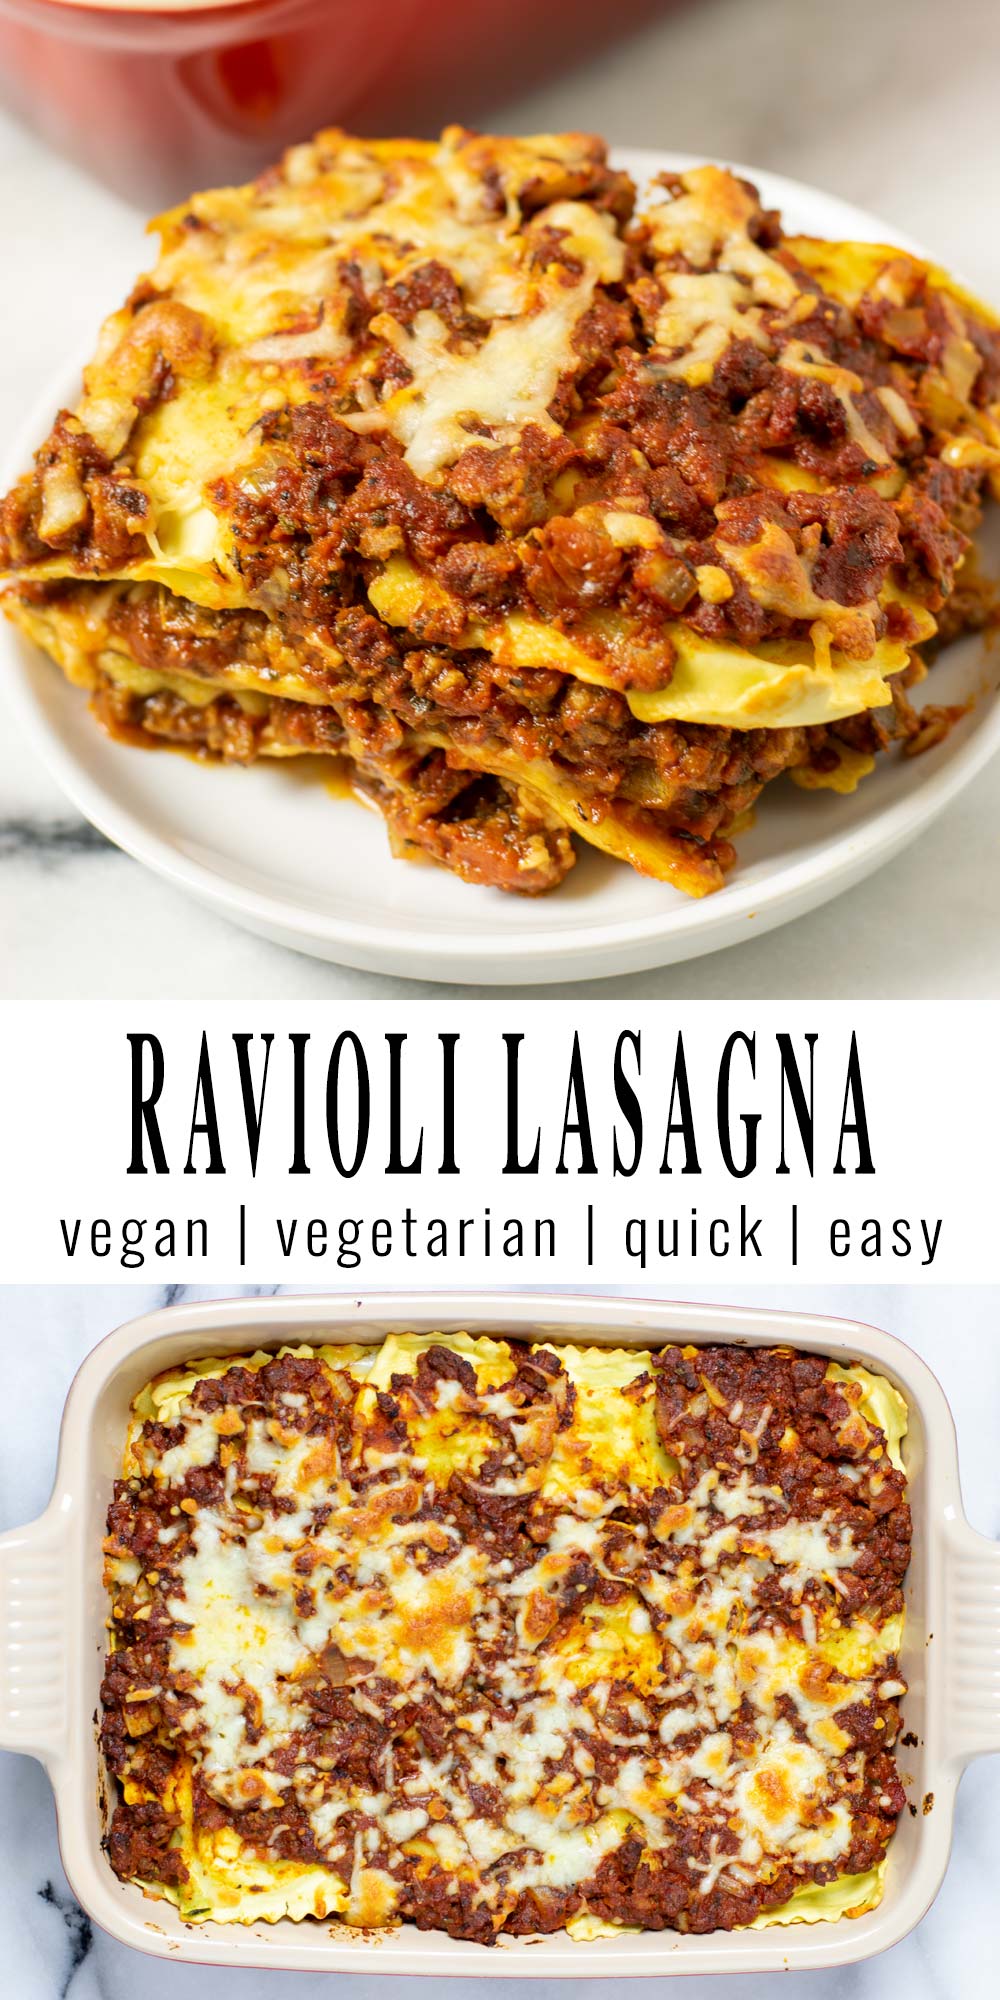 Collage of two pictures of the Ravioli Lasagna with recipe title text.